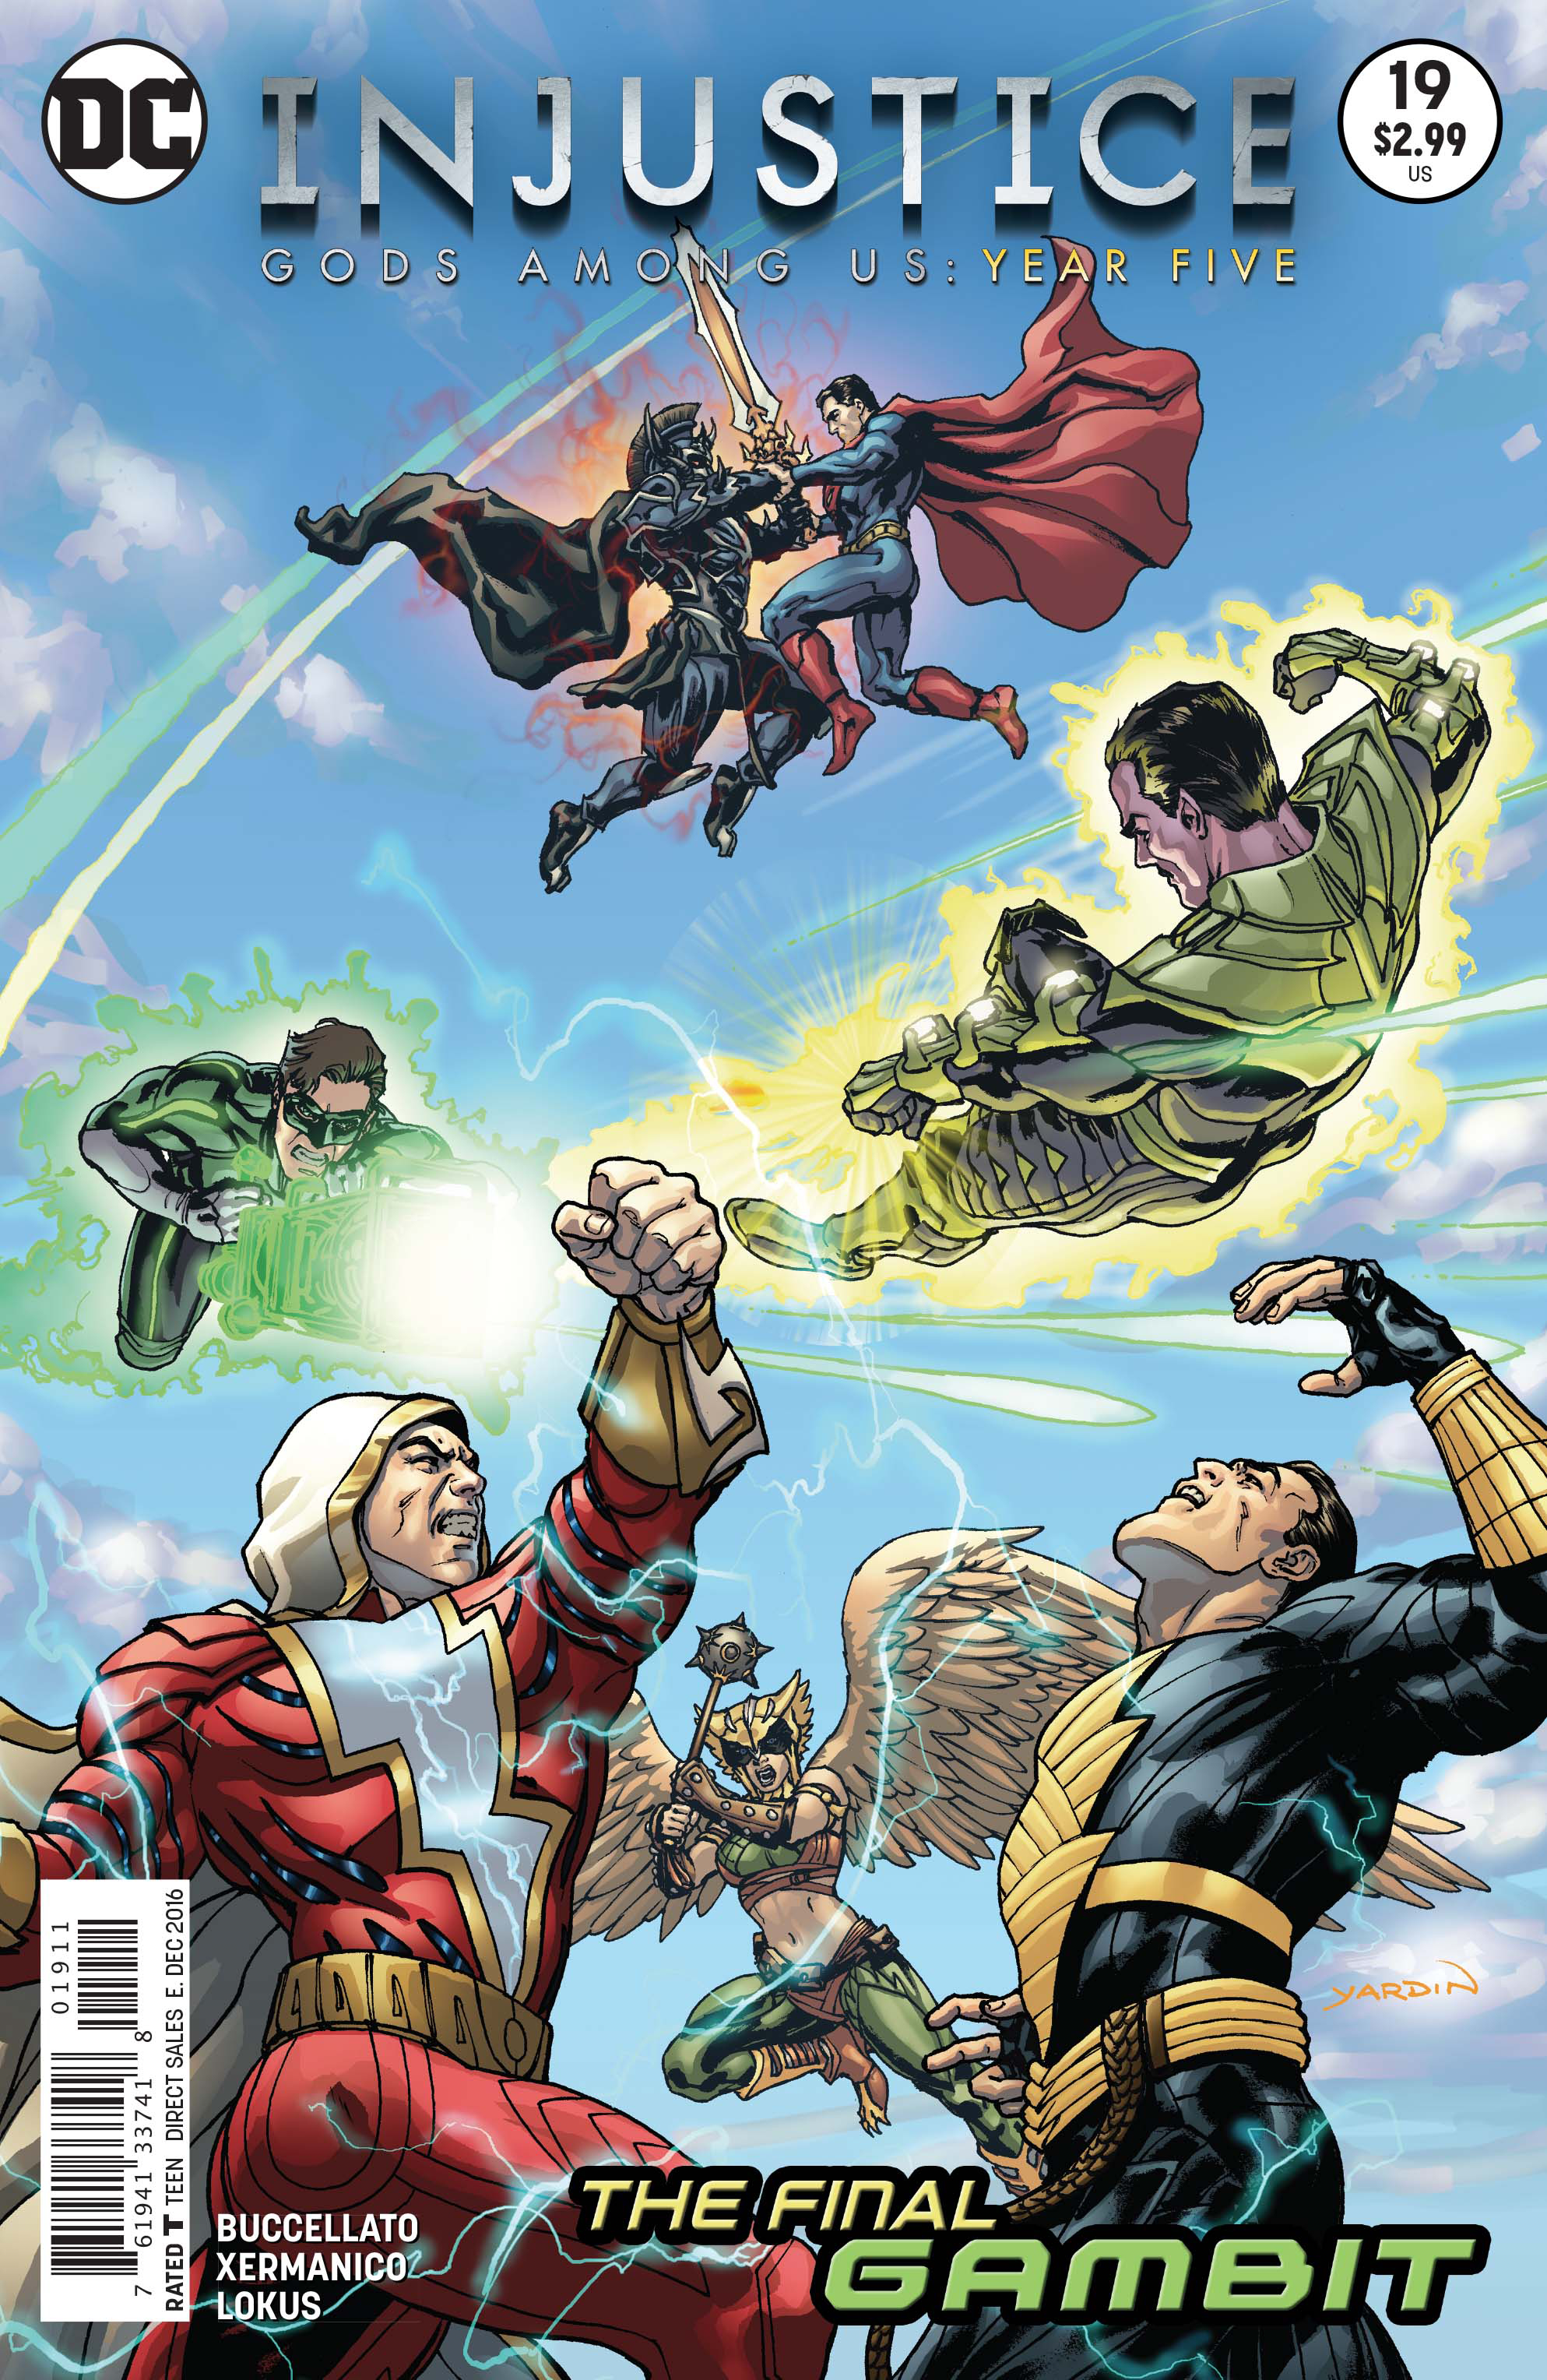 Injustice gods among us year five